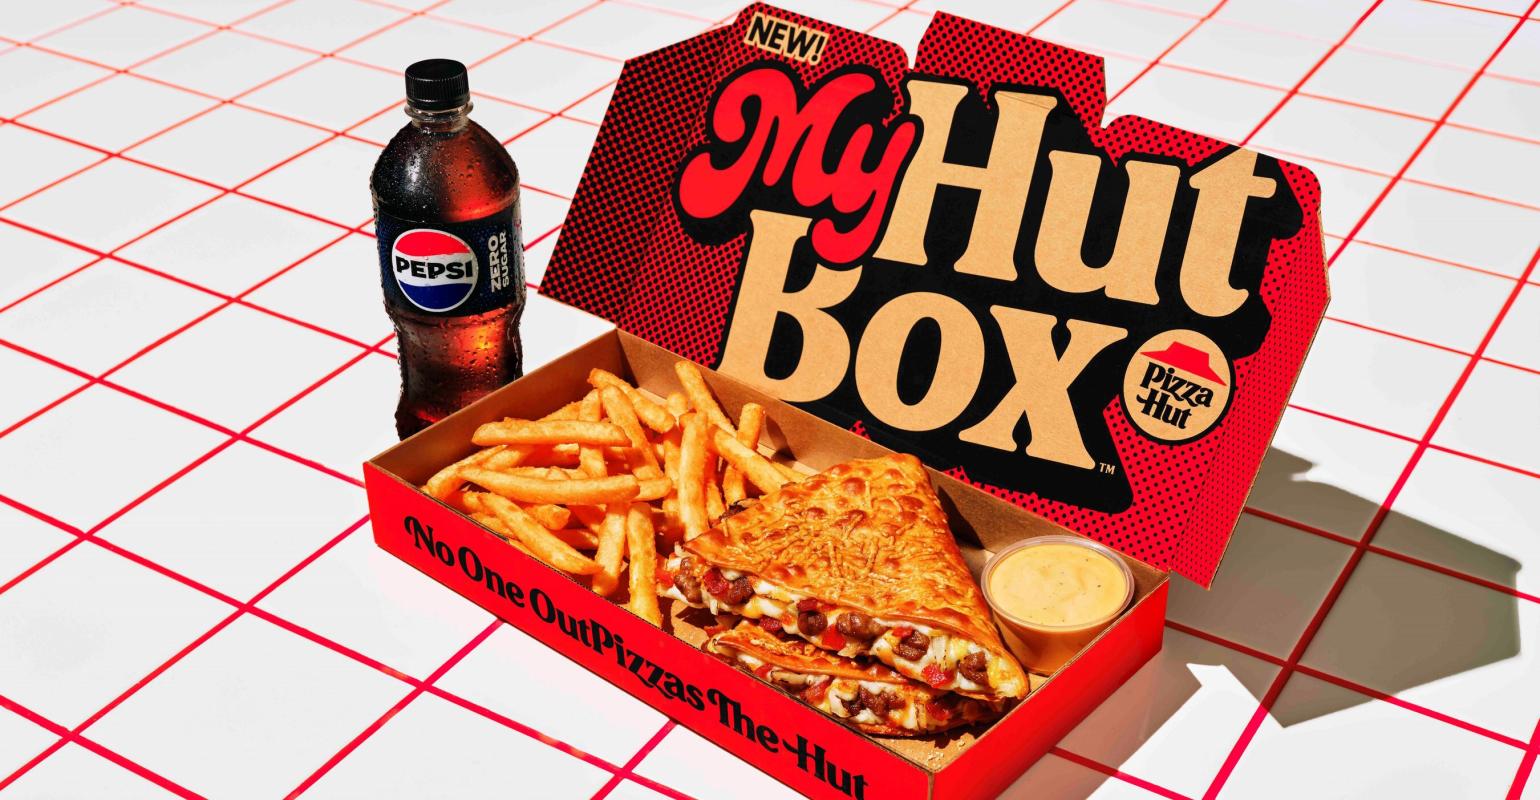 Pizza Hut is expanding its menu to include burgers